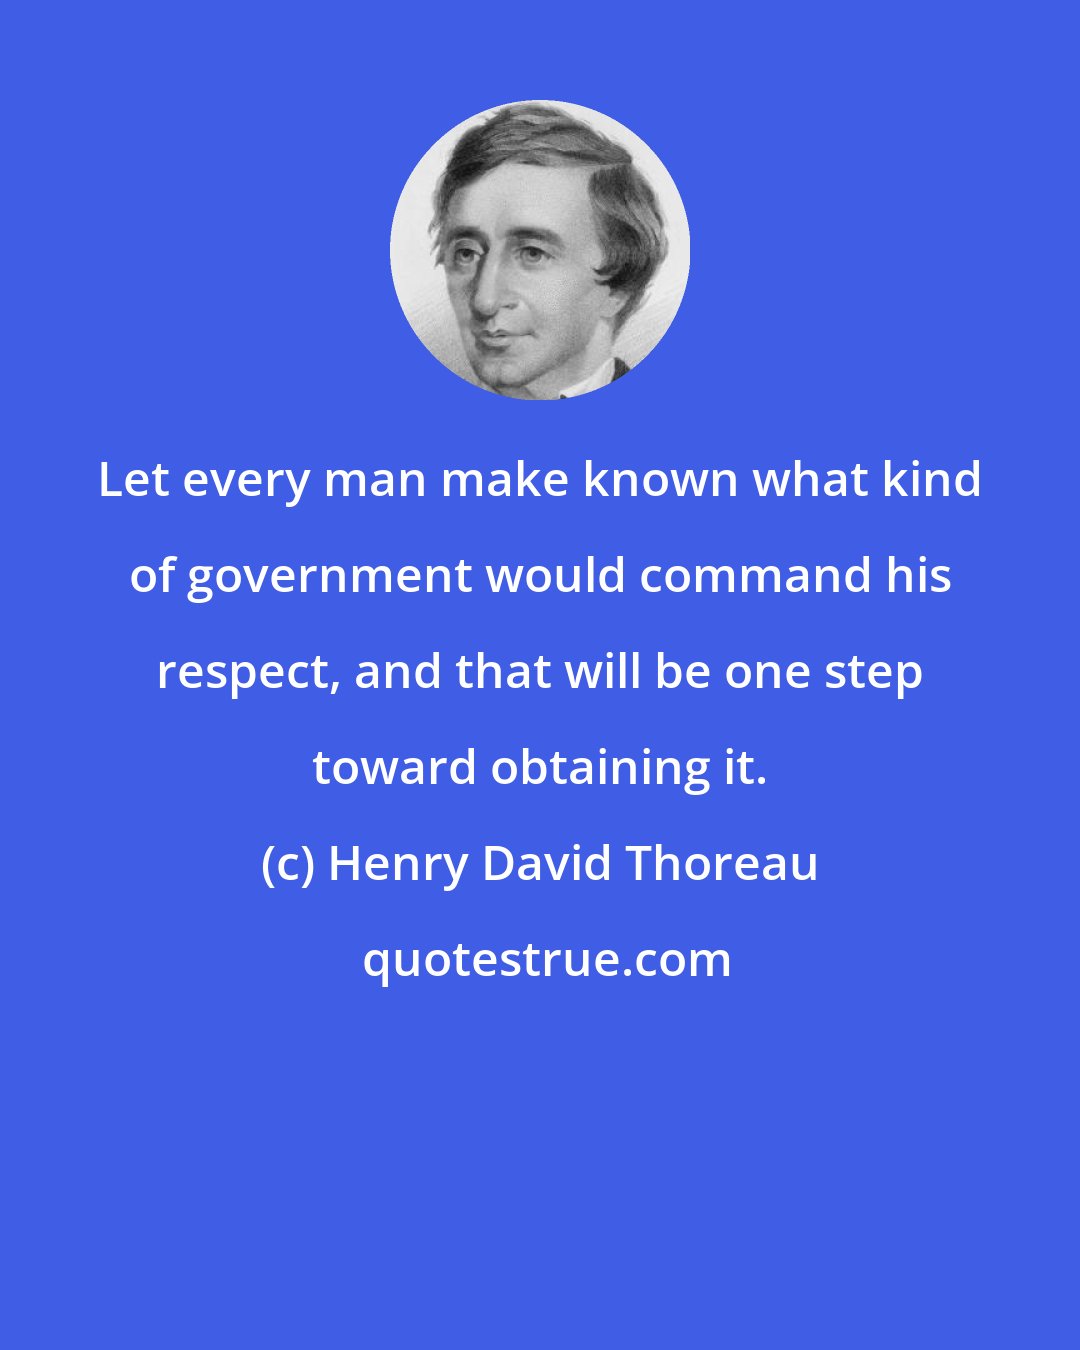 Henry David Thoreau: Let every man make known what kind of government would command his respect, and that will be one step toward obtaining it.